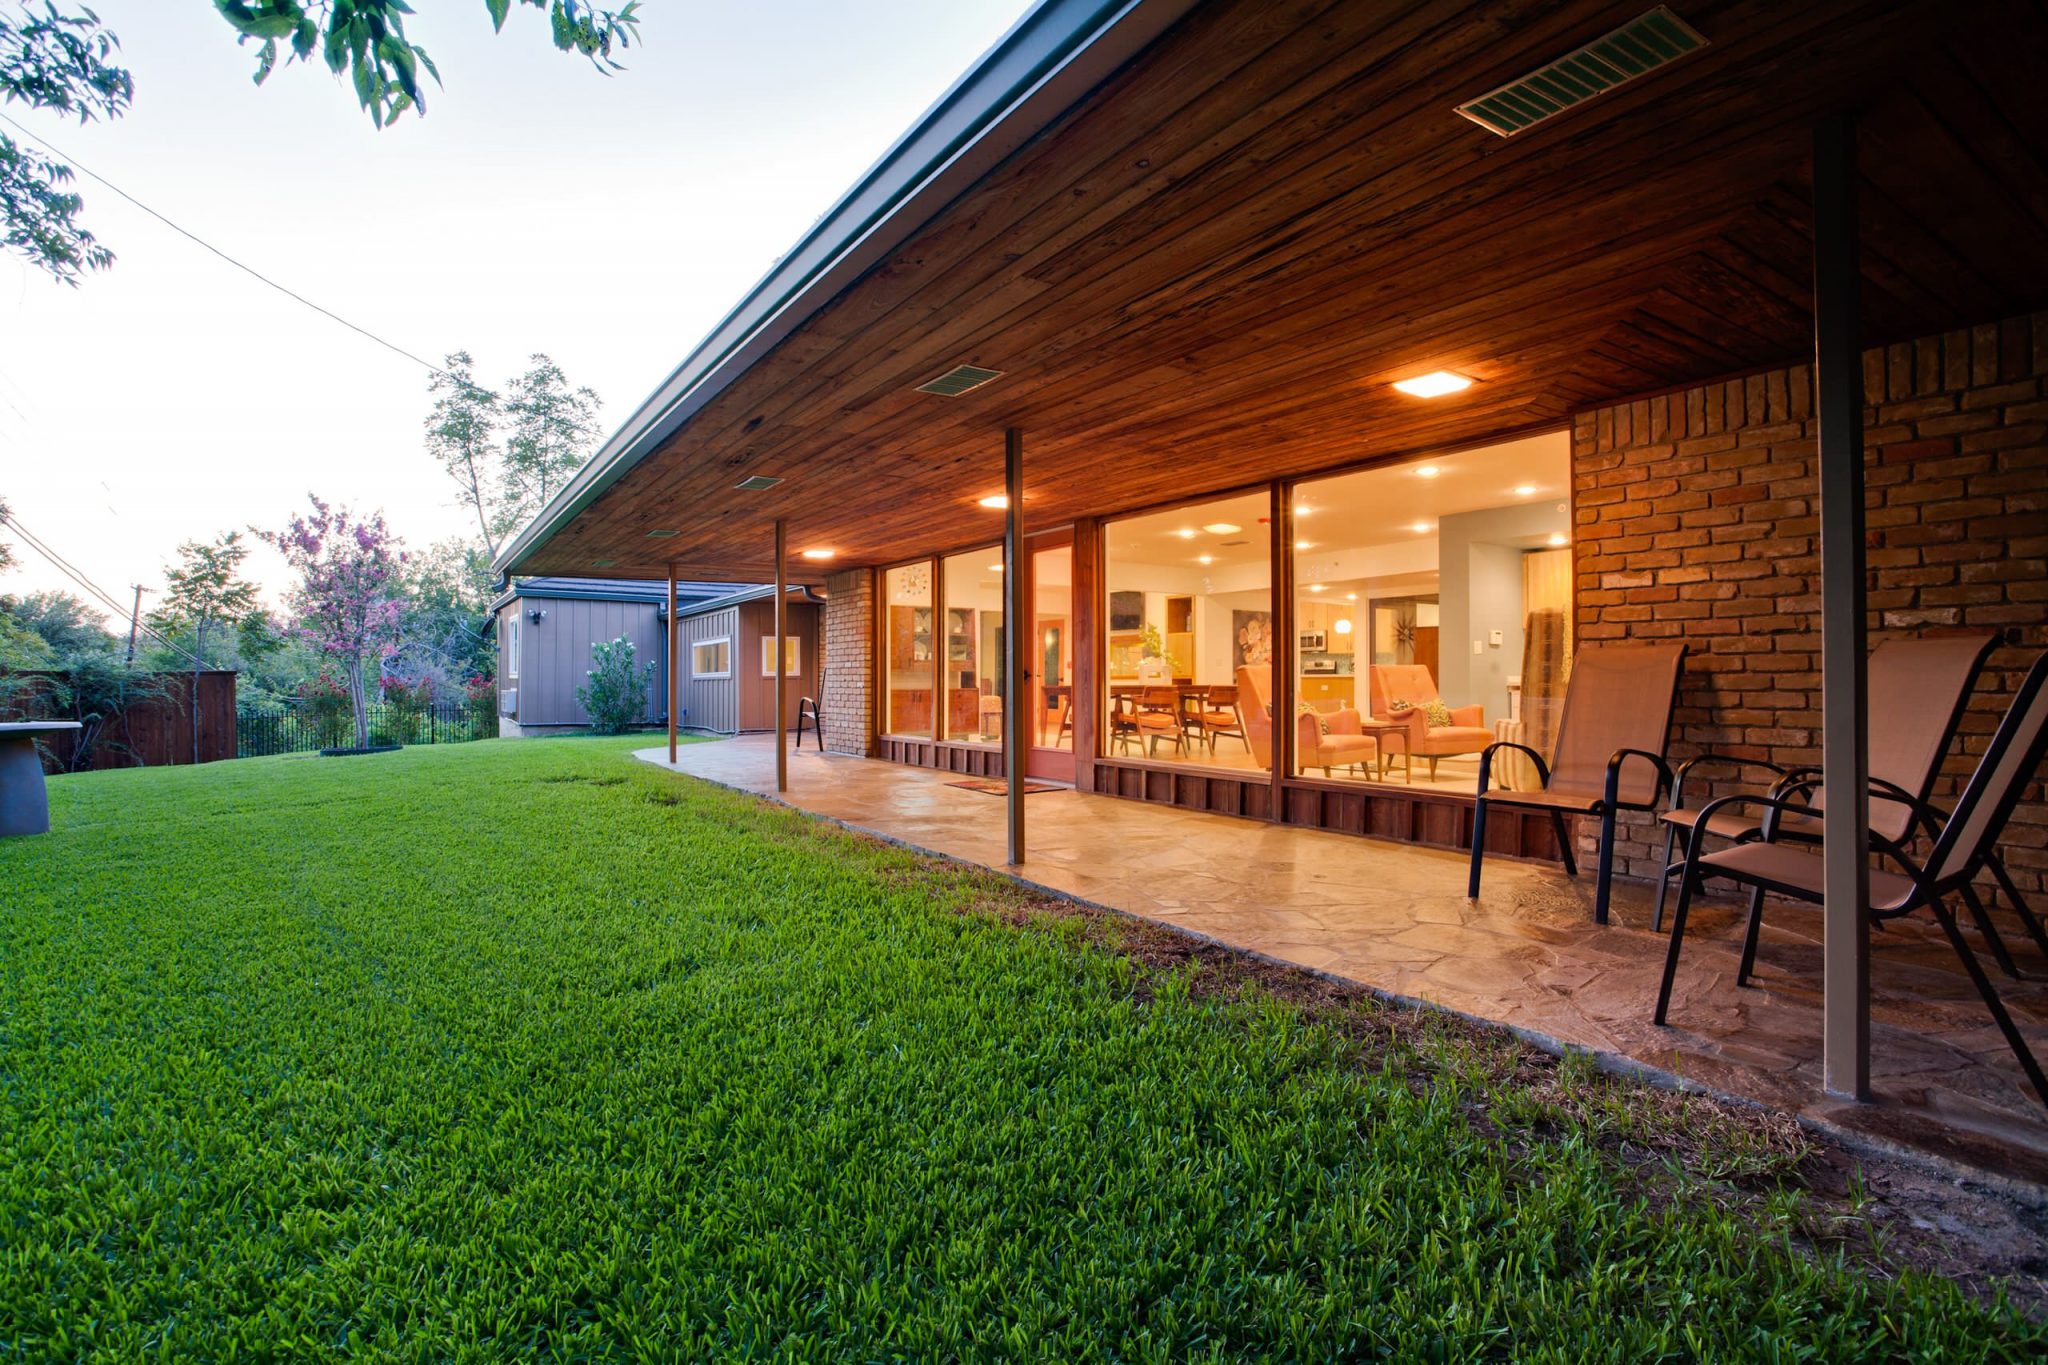 17 Stunning Mid-Century Modern Porch Designs Perfect For The Summer